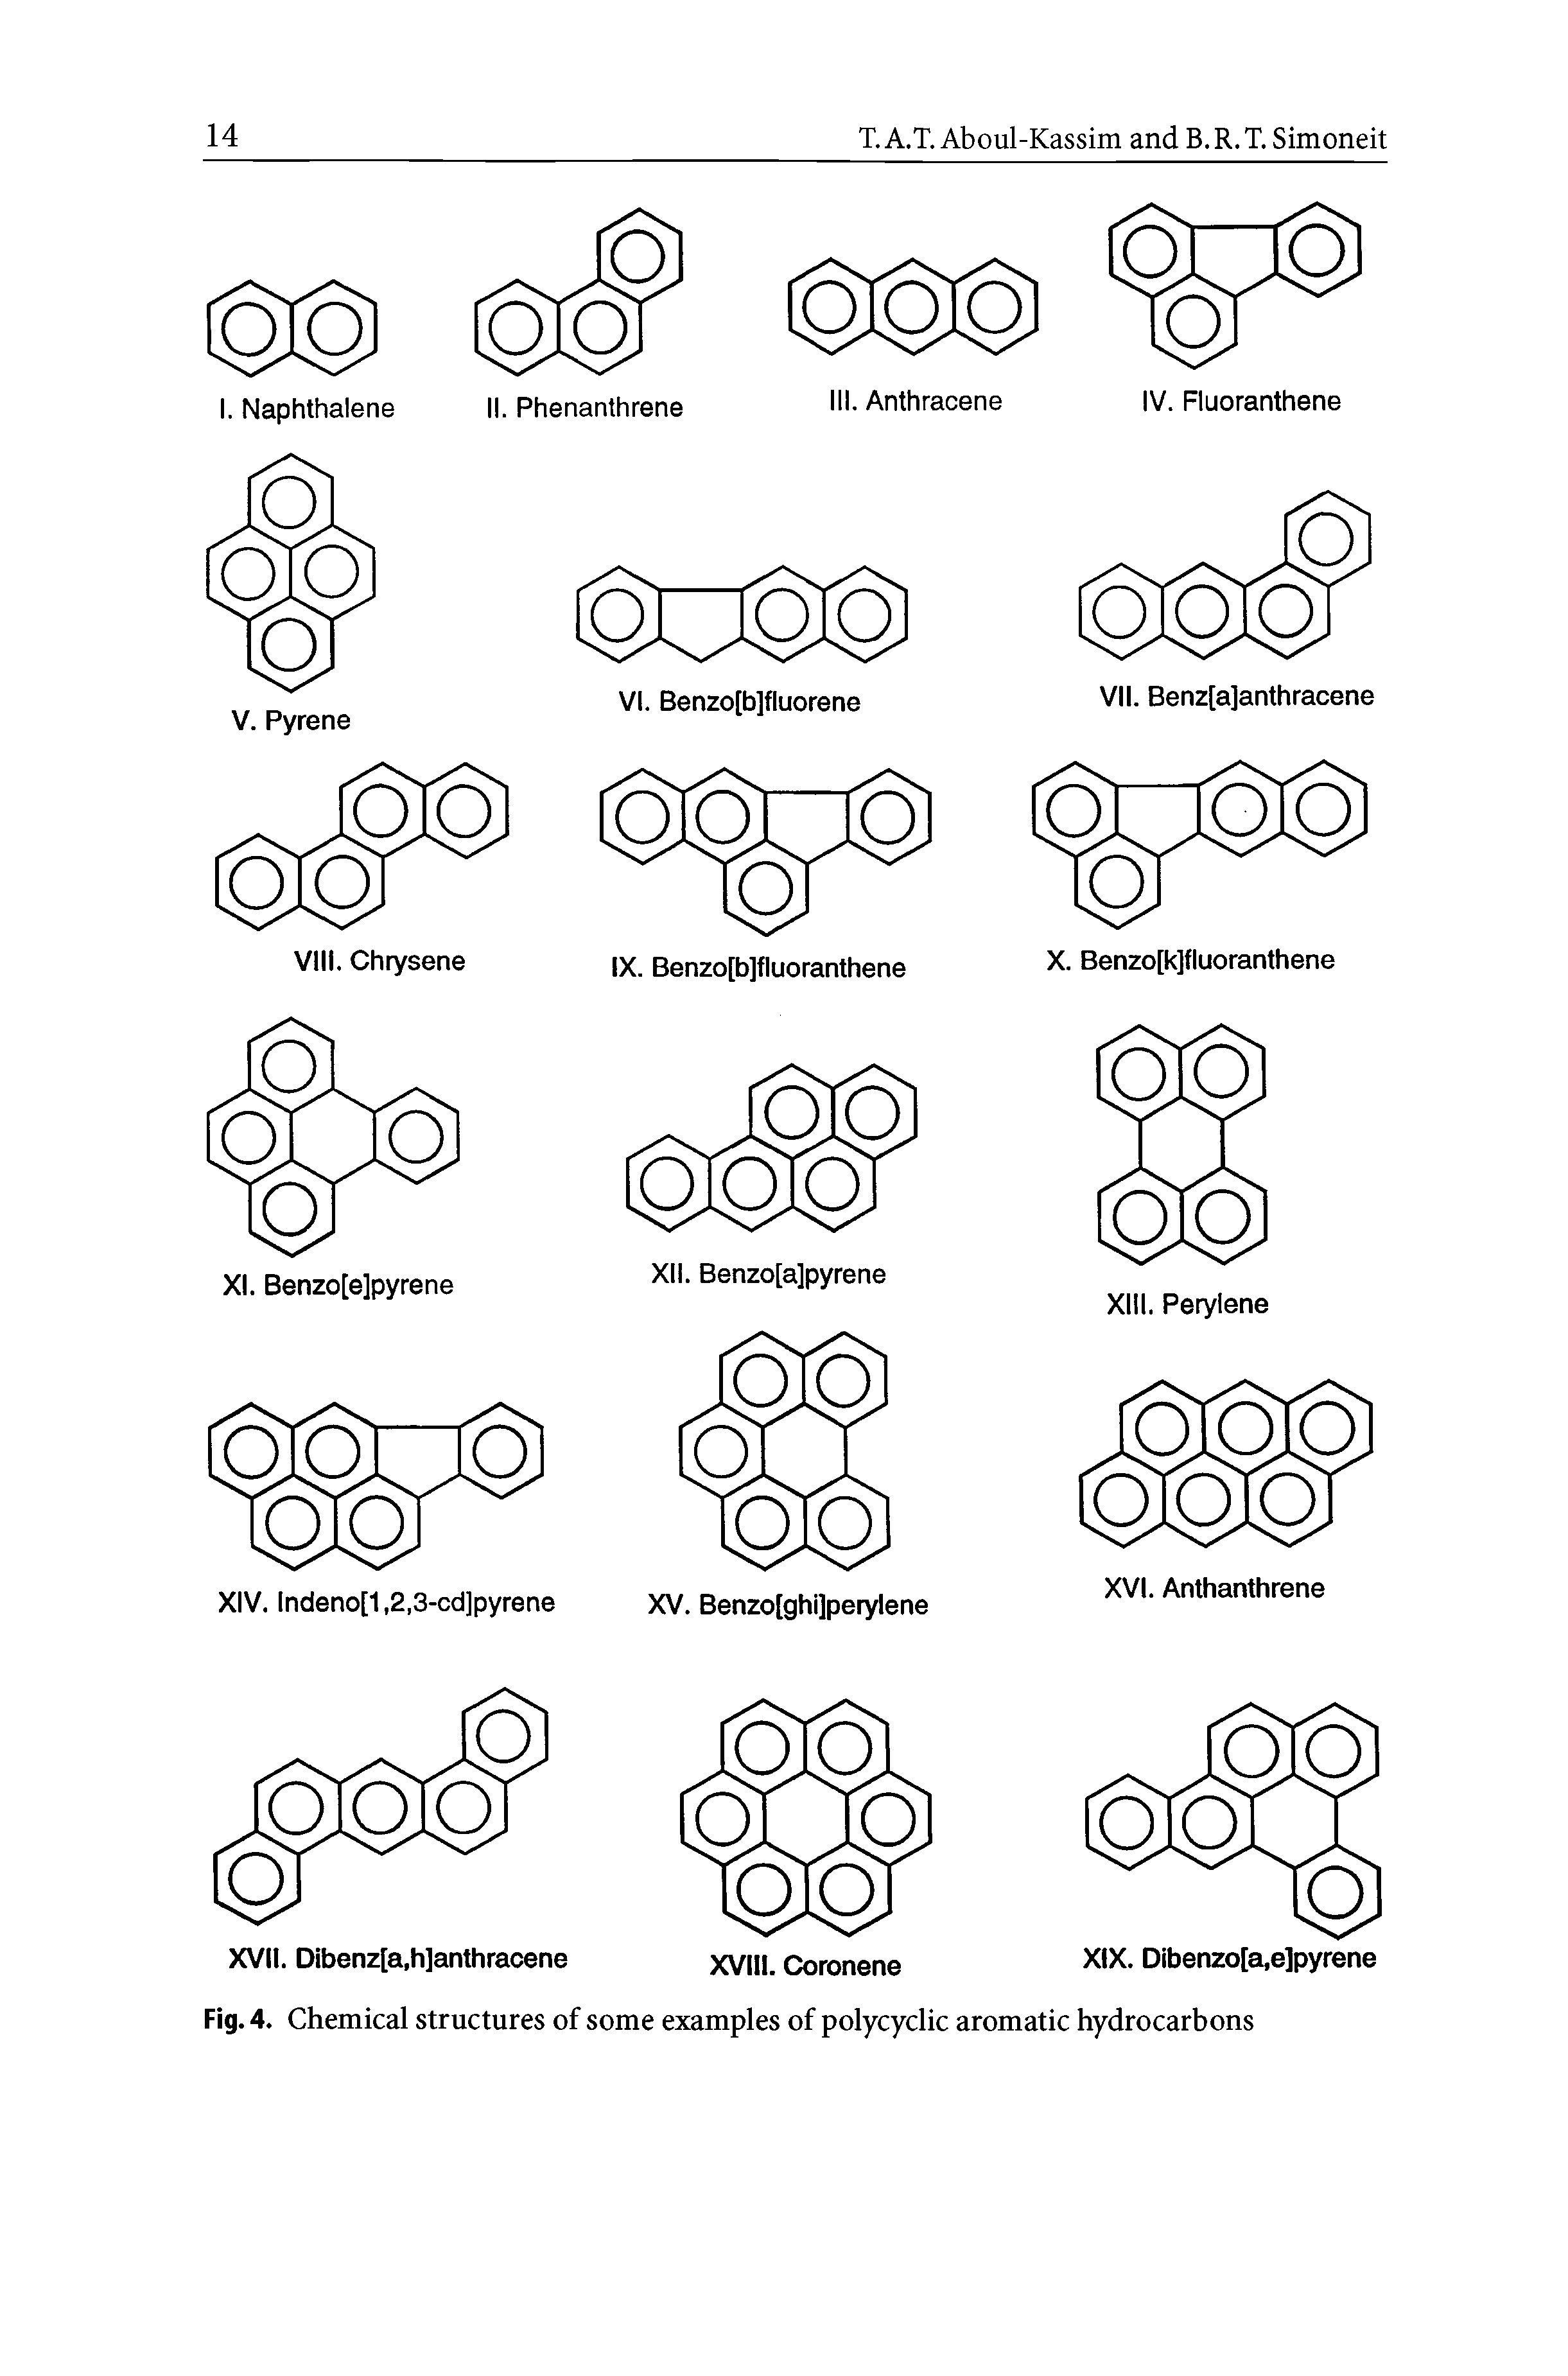 Fig. 4. Chemical structures of some examples of polycyclic aromatic hydrocarbons...